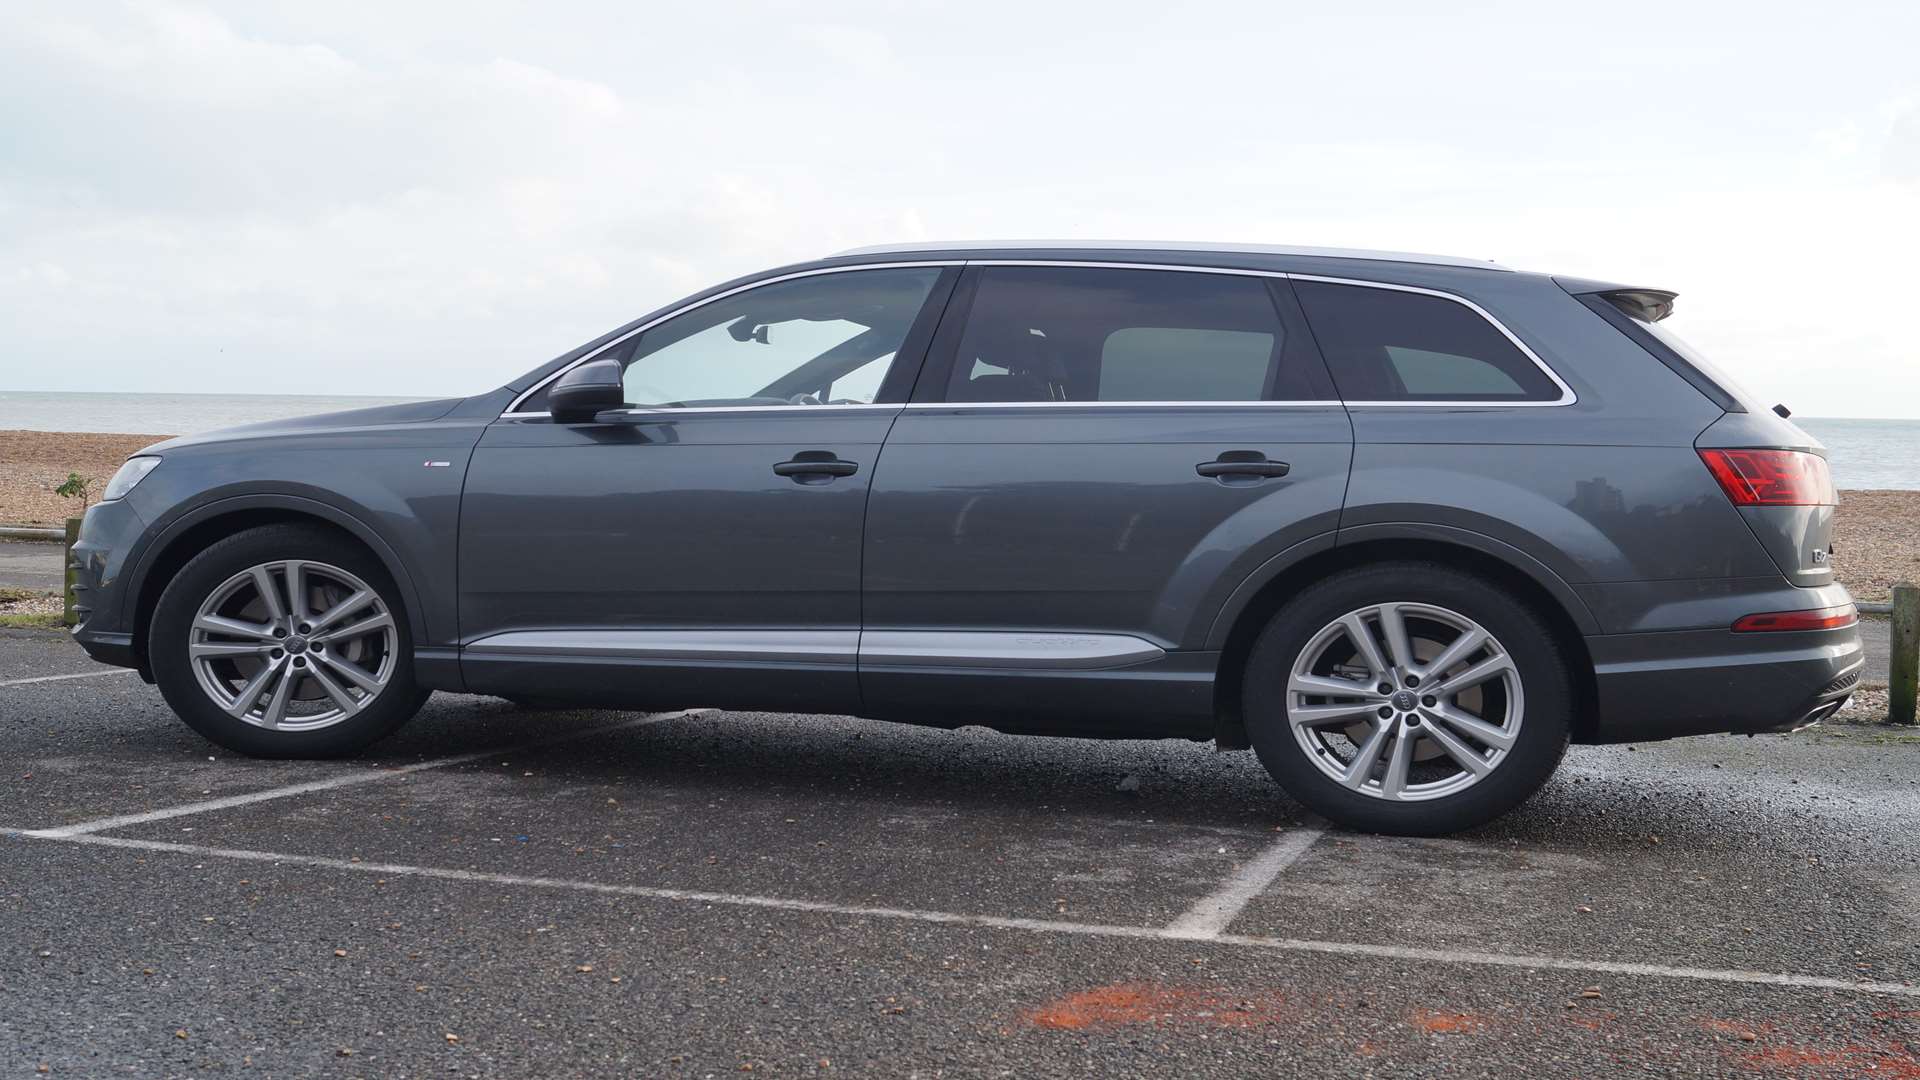 The new Q7 is smaller and lighter than the model it replaces